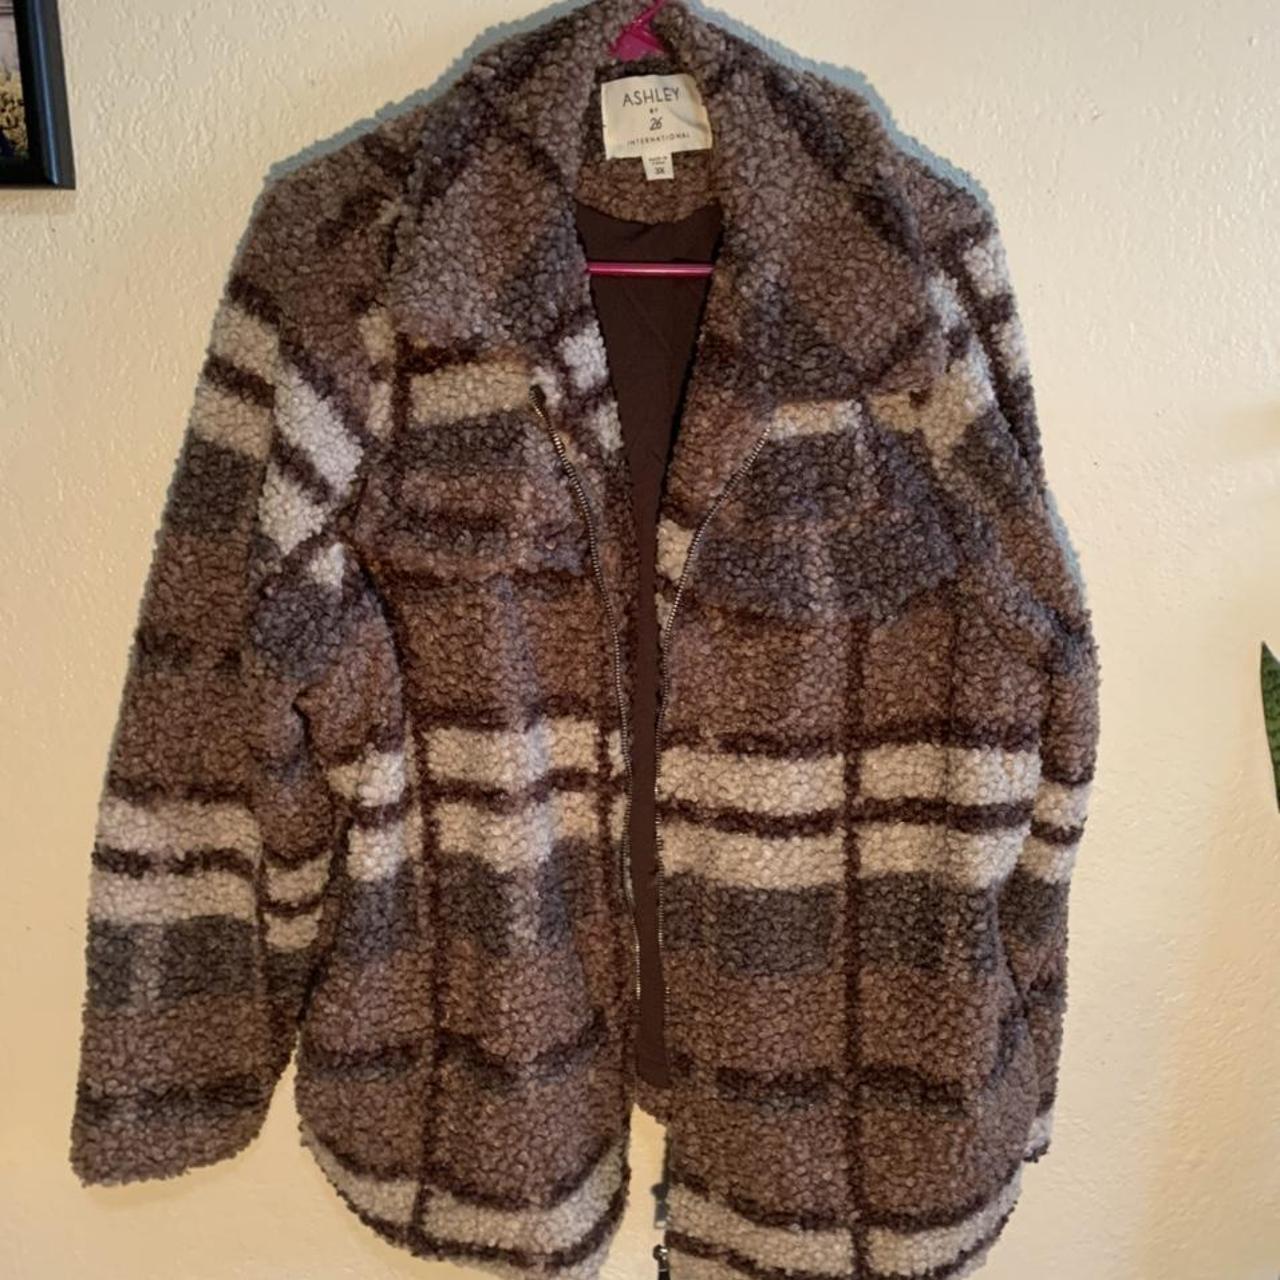 Women's Brown and White Jacket